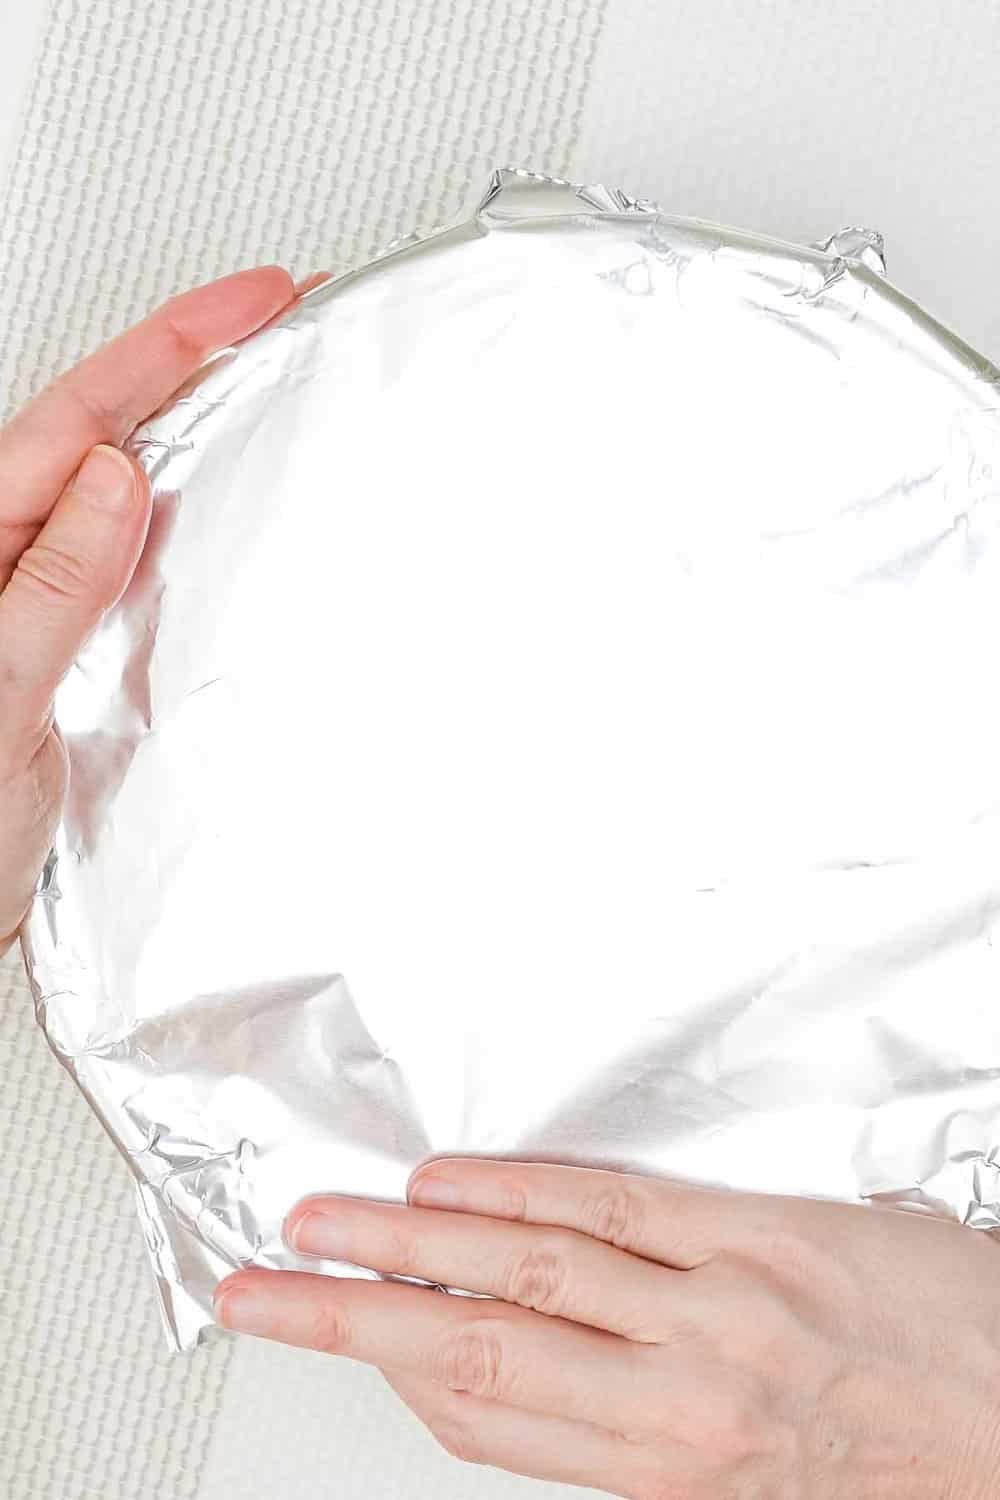 wrapping cake in aluminum foil to prevent freezer burn